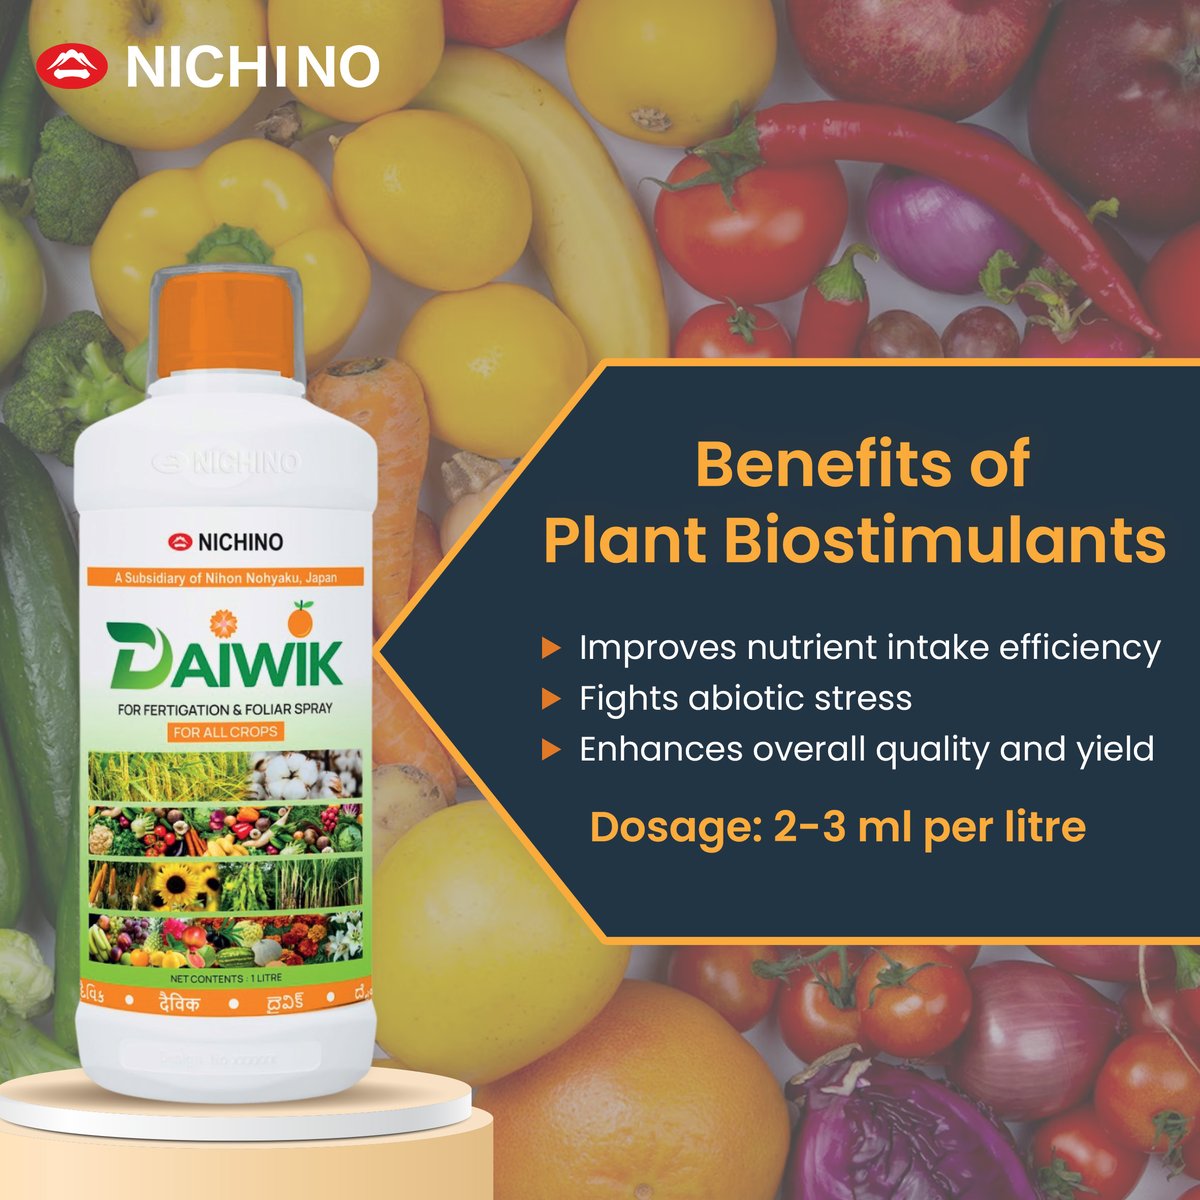 An excellent organic nutritional product that can be used in almost all agricultural crops.

#daiwik #agriculture #biostimulant #cropprotection #nichinoindia